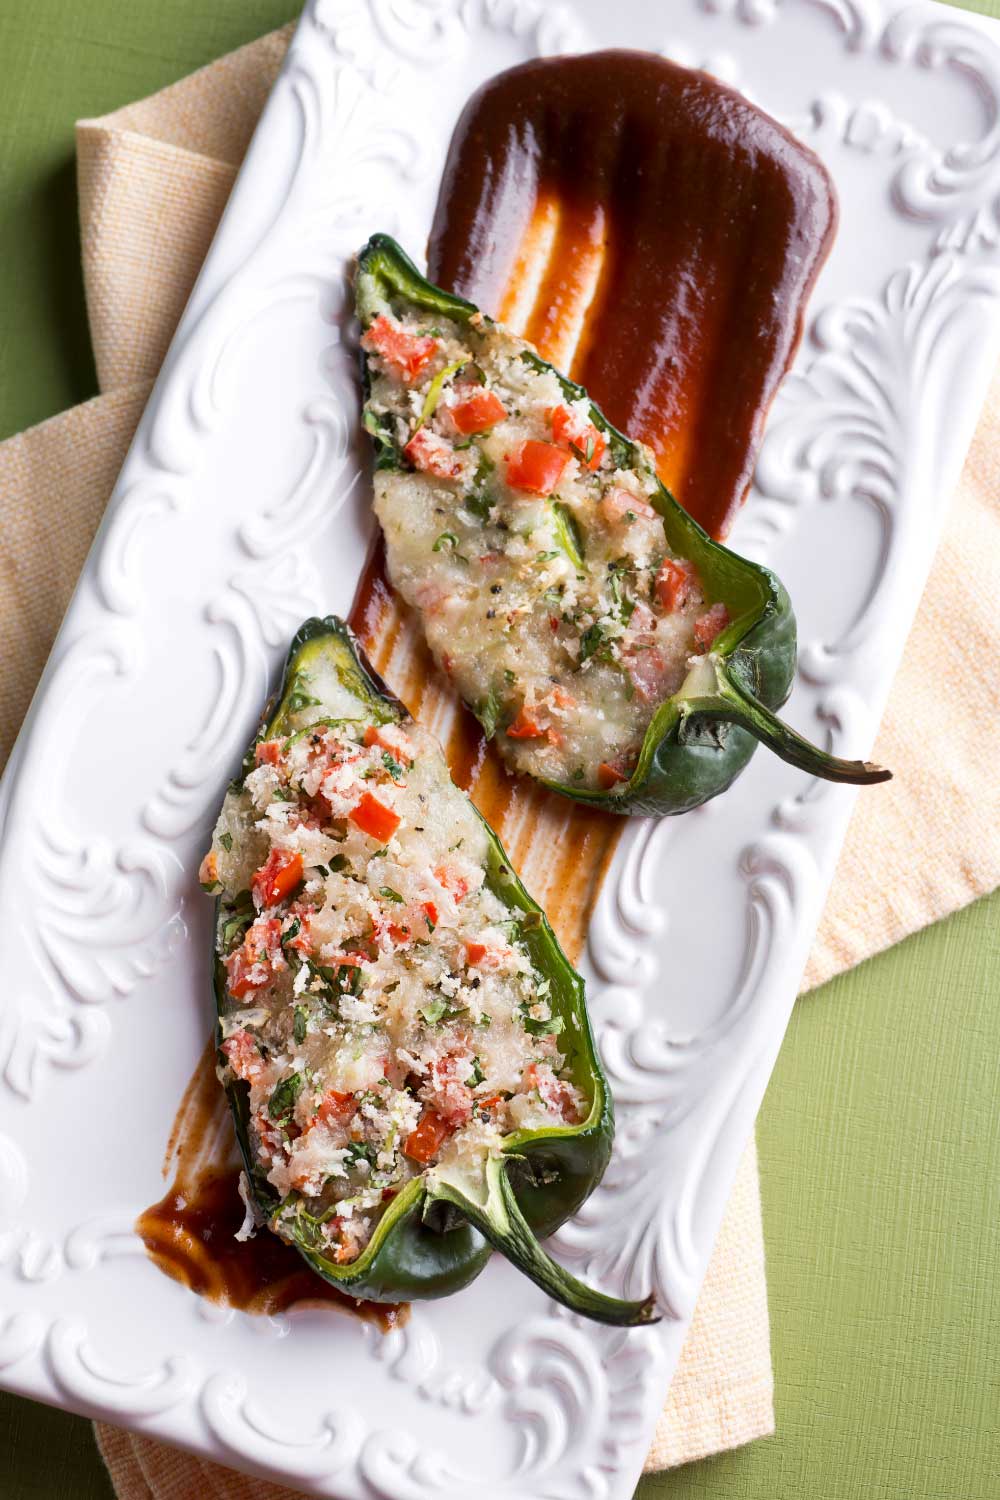 Chili-Stuffed Poblano Peppers